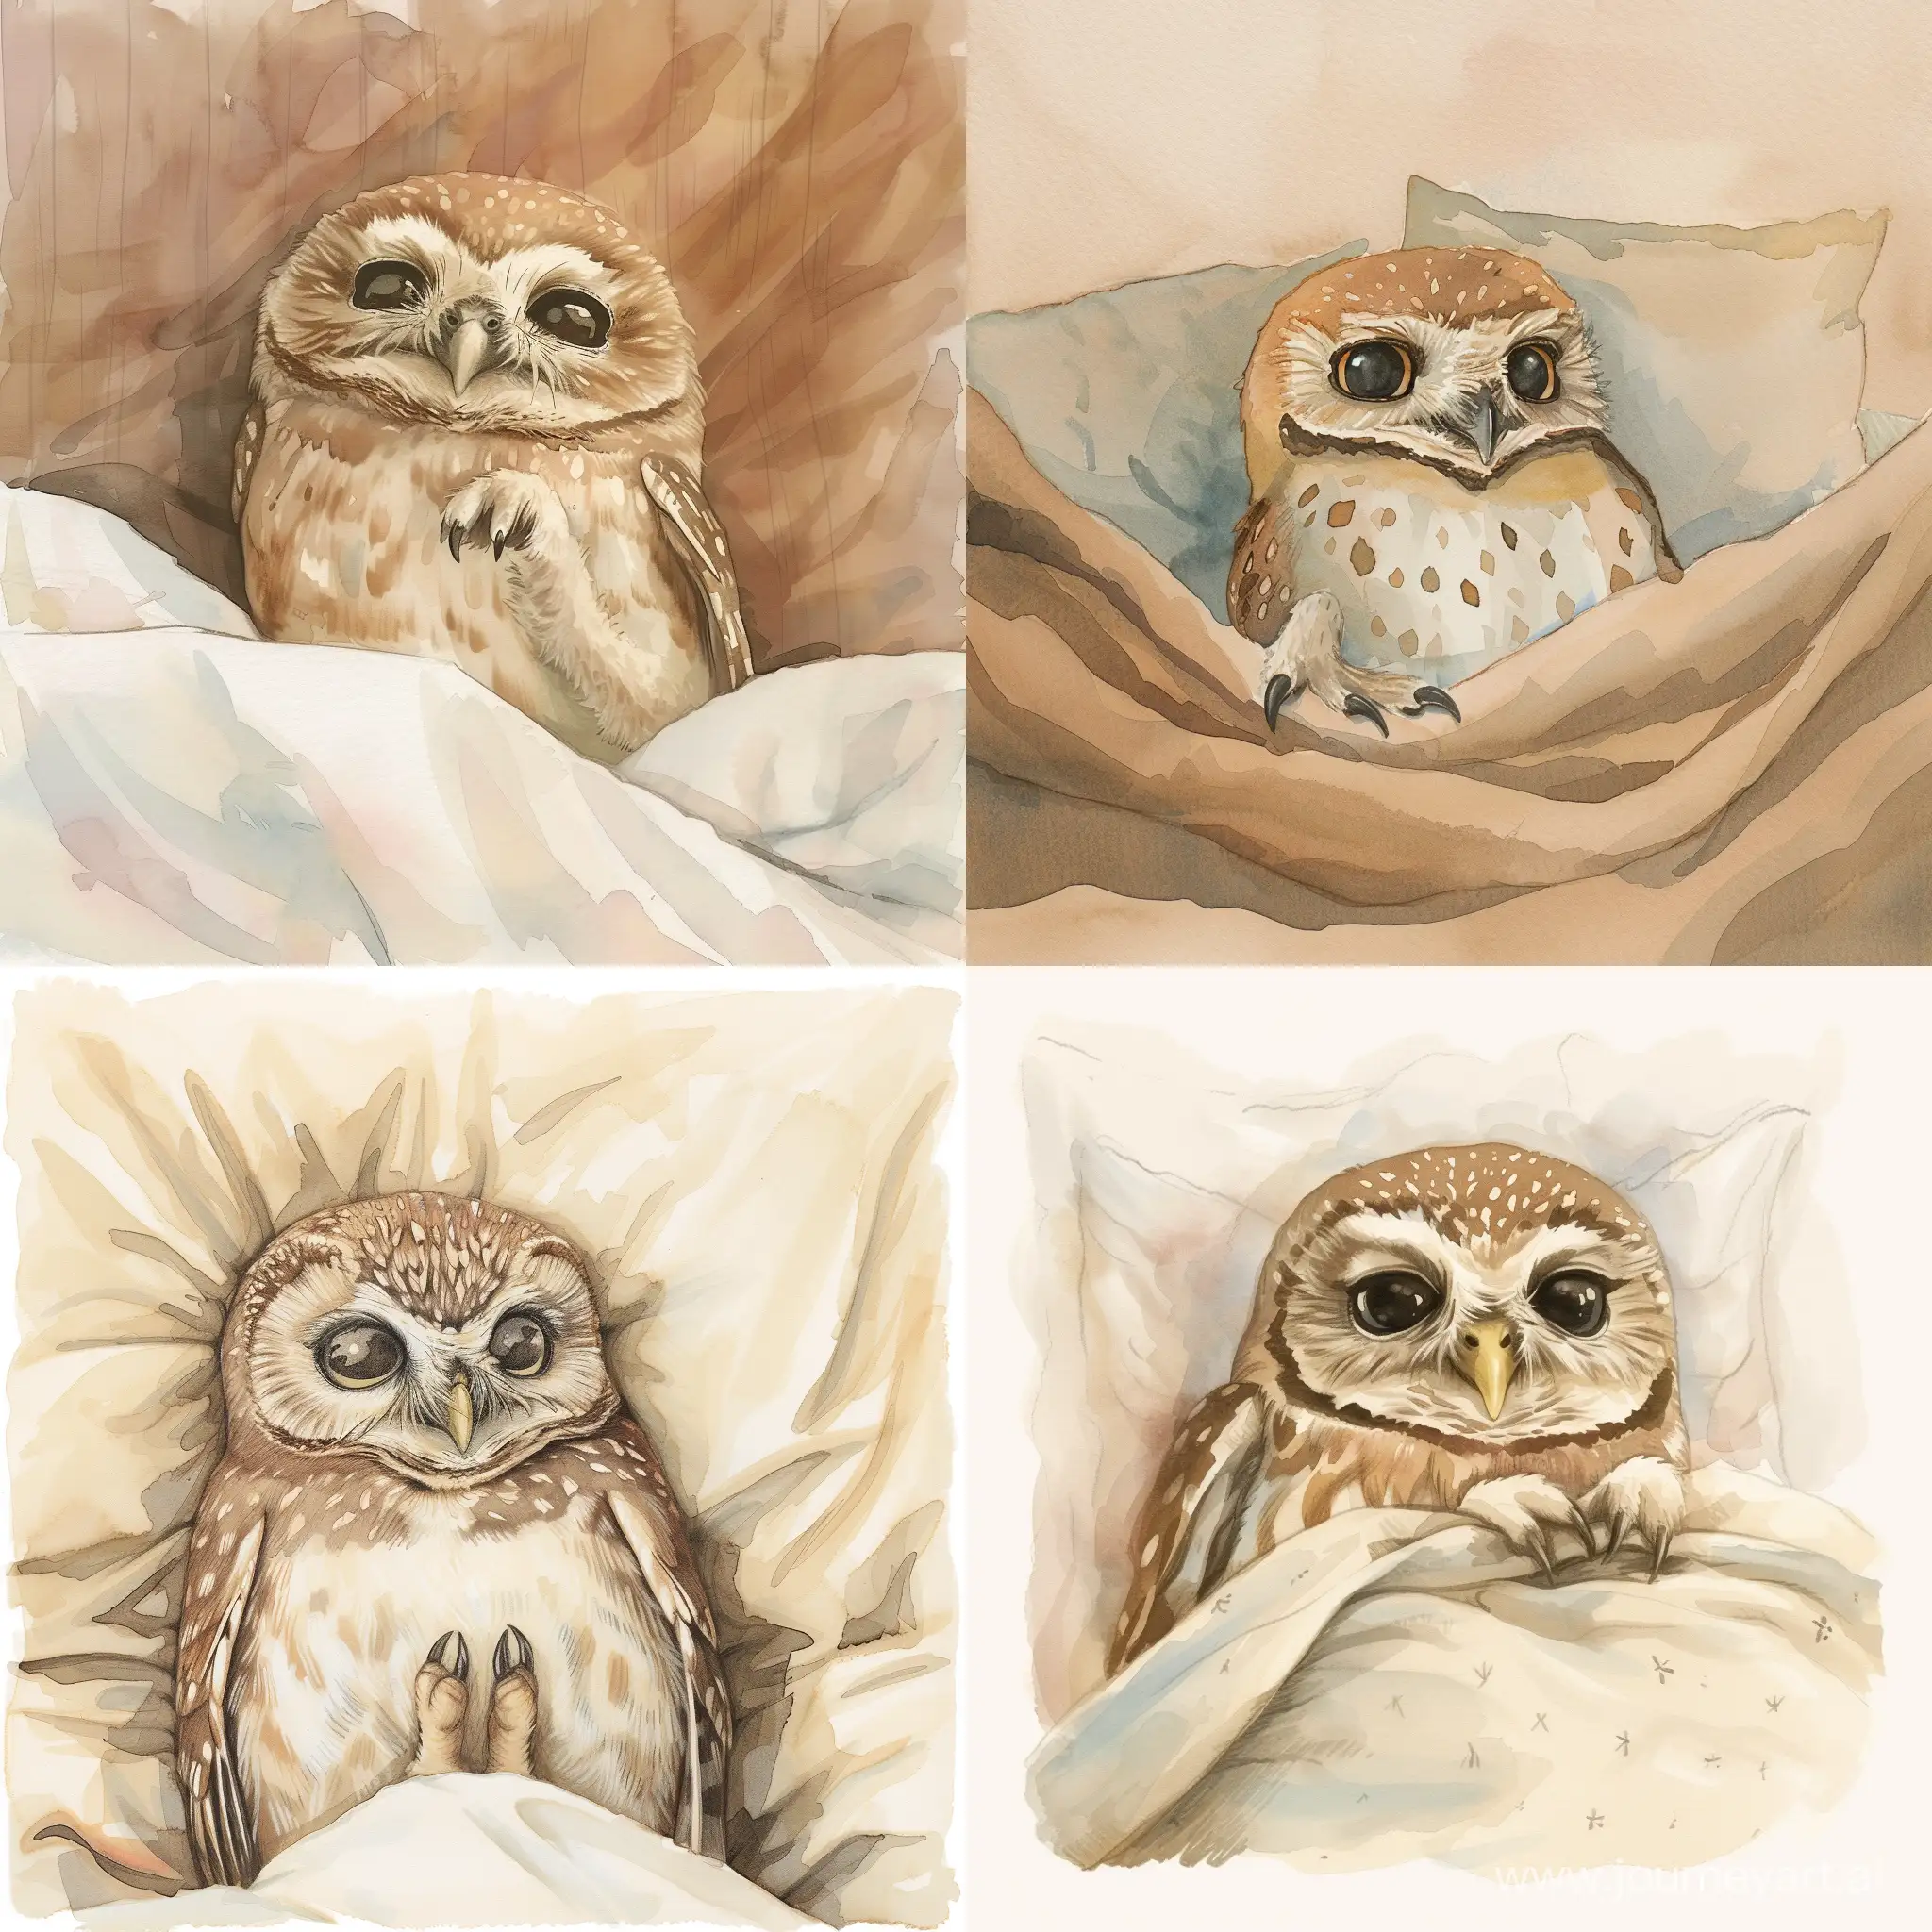 Adorable-Owl-Waking-Up-in-Bed-Watercolor-Good-Morning-Scene